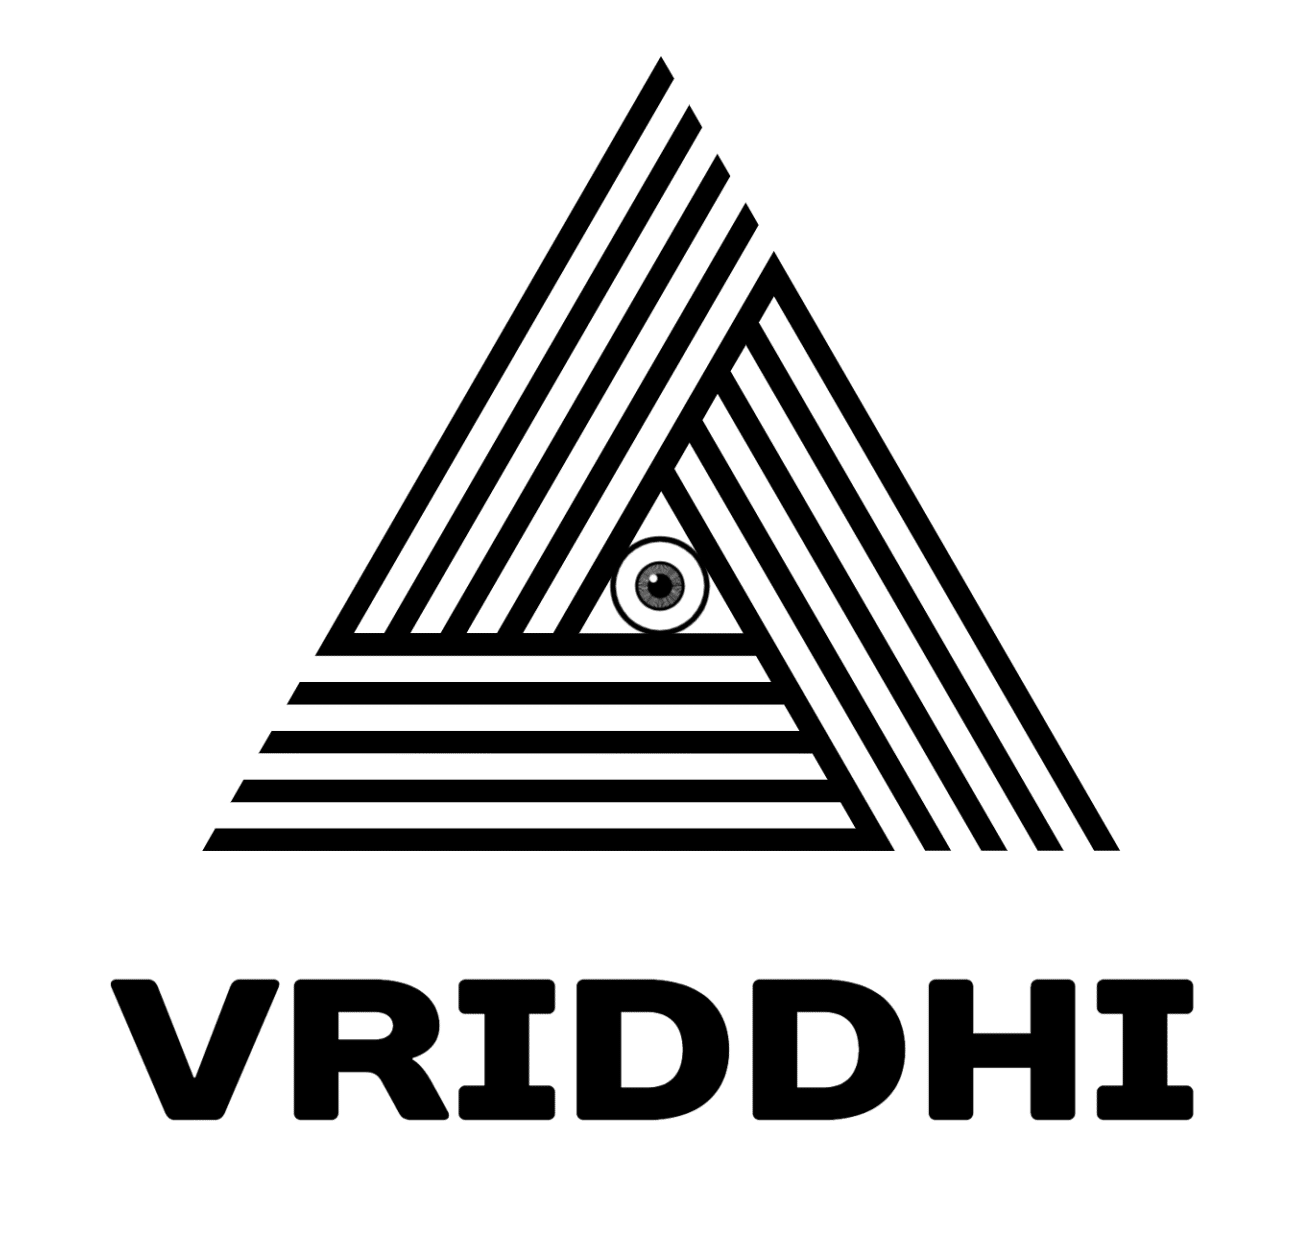 Vriddhi: Revolutionizing Education with Bharat's First Multi-Lingual, Affordable Online Platform - Bangalore Tutoring, Lessons